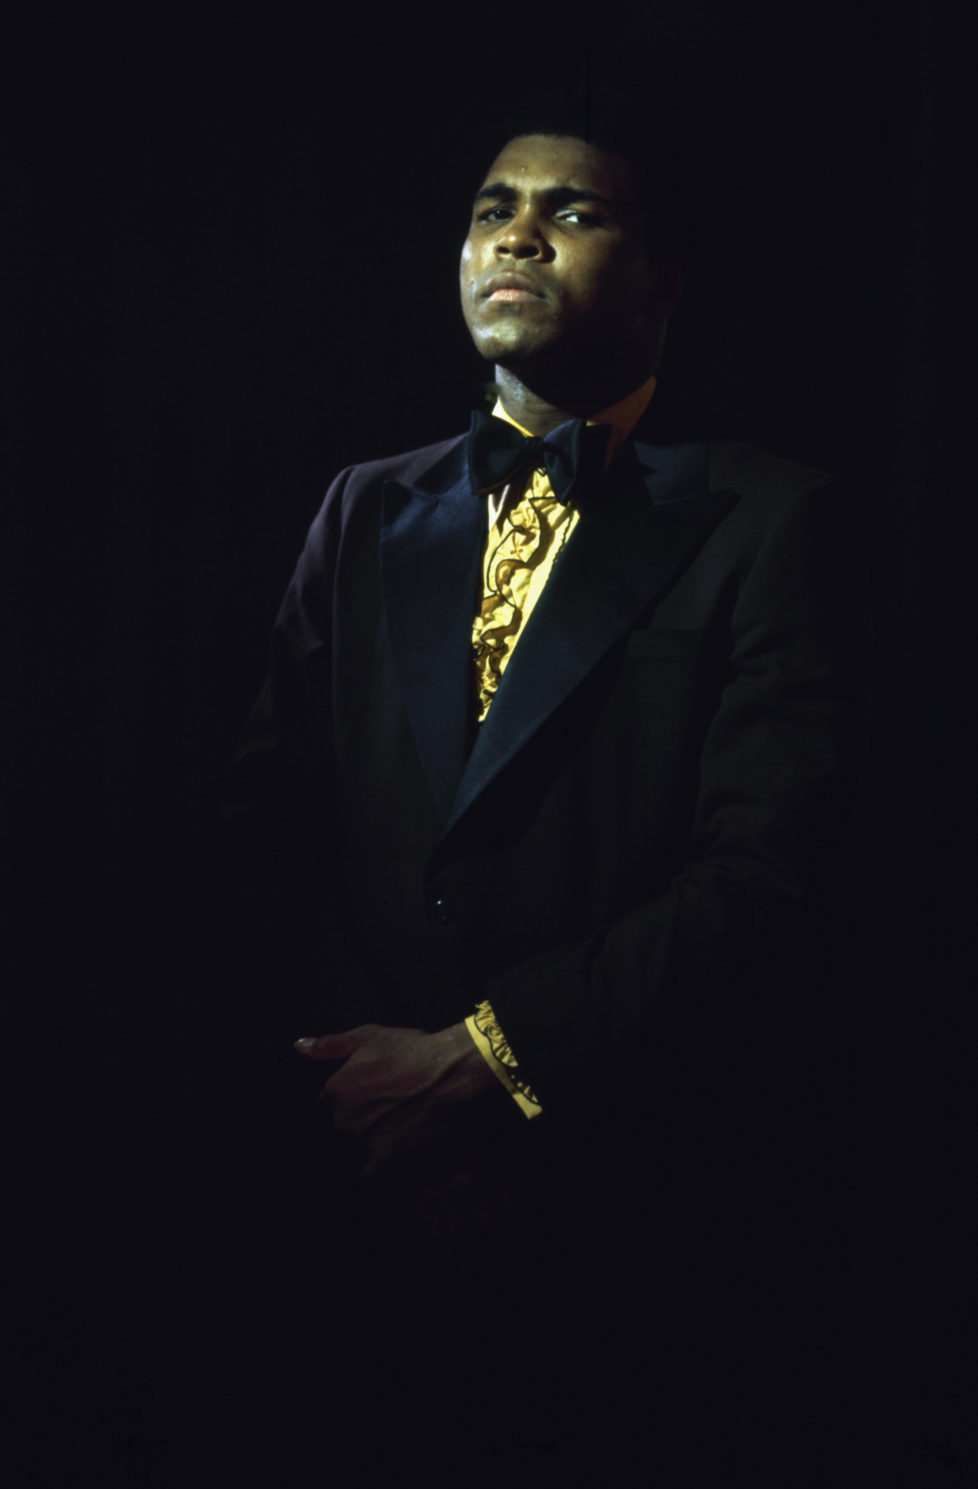 Portrait of American heavyweight boxer Muhammad Ali, in a tuxedo, ruffled yellow shirt, and bowtie, 1971. The portrait was taken prior to his first bout with Joe Frazier, where he unsuccessfully battled for the title belt on March 8, 1971 at Madison Square Garden. (Photo by John Shearer/The LIFE Picture Collection/Getty Images)